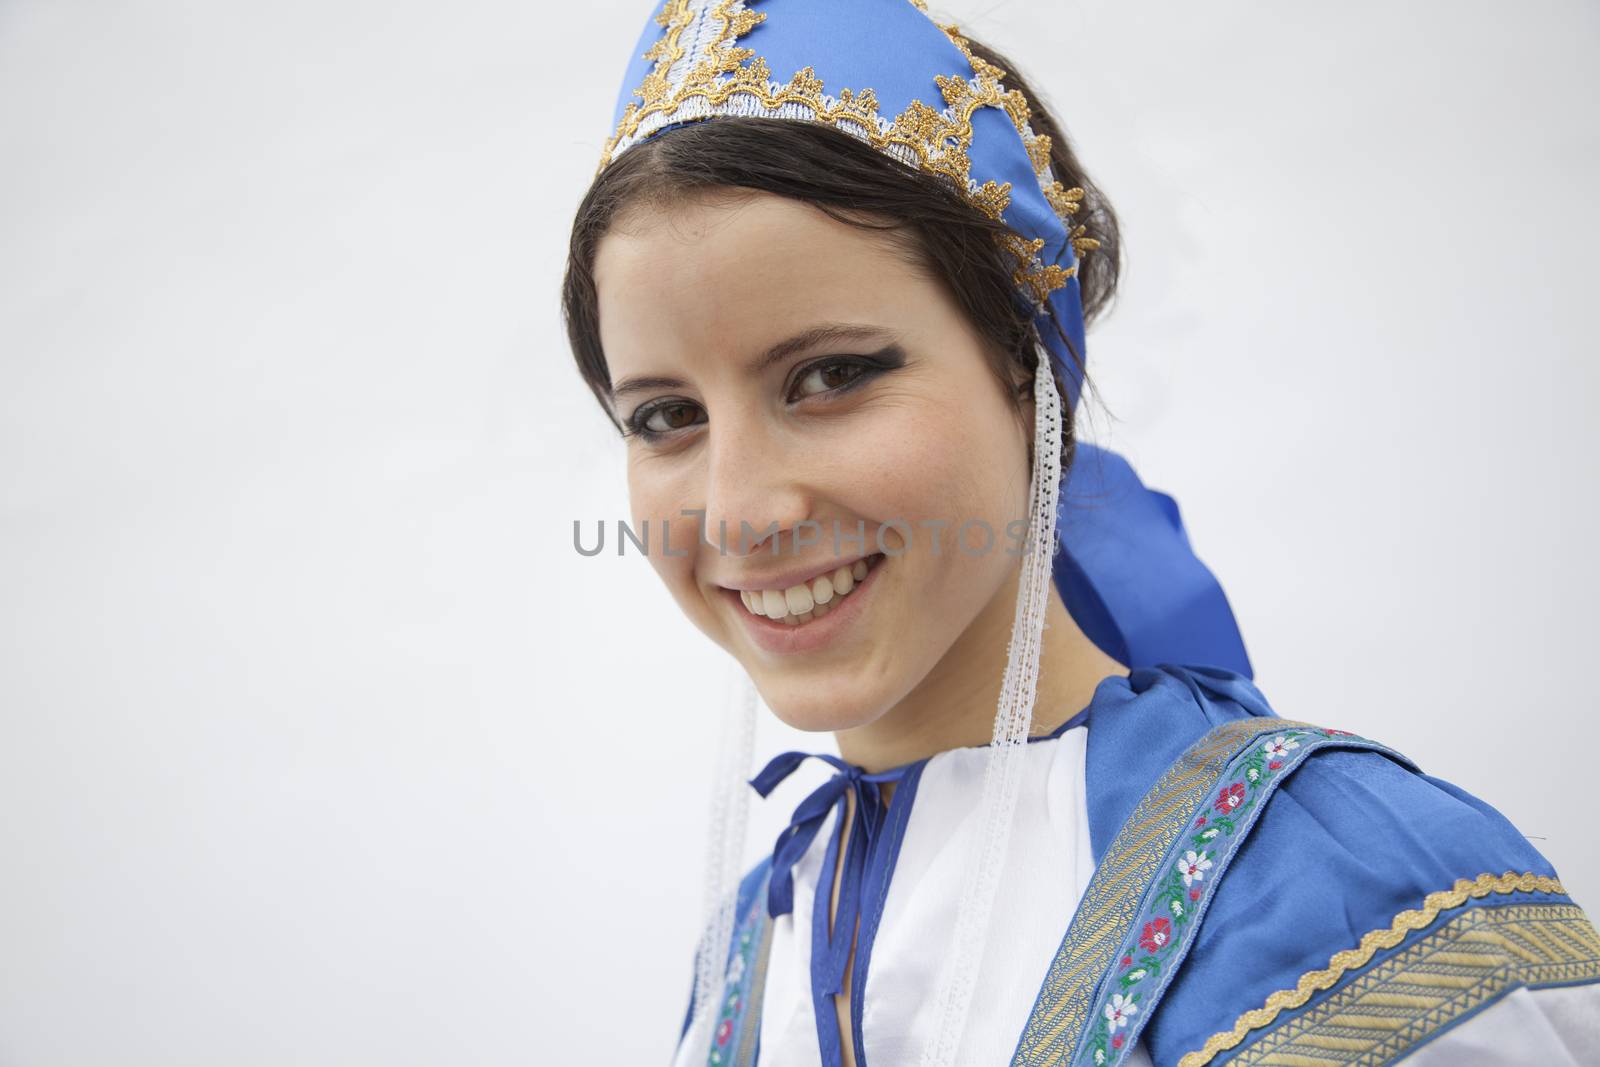 Portrait of young smiling woman in traditional clothing from Russia, studio shot